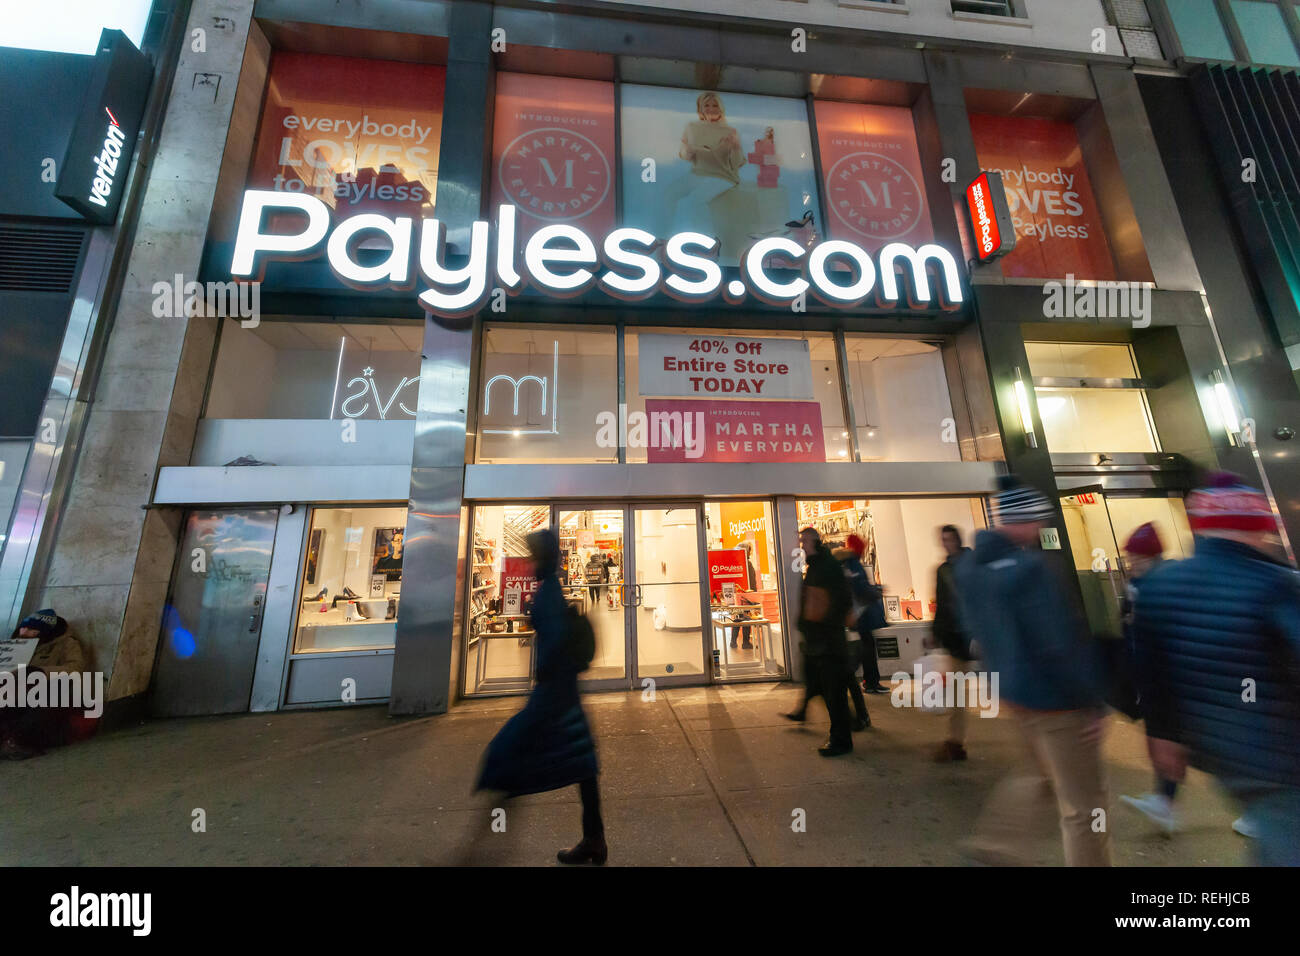 A Payless ShoeSource store in Herald Square in New York on Tuesday, January 15, 2019. The retailer is reported to have hired an advisor for evaluation of strategic alternatives which could include a sale of the company. Payless emerged from bankruptcy protection less than 18 months ago. (Â© Richard B. Levine) Stock Photo